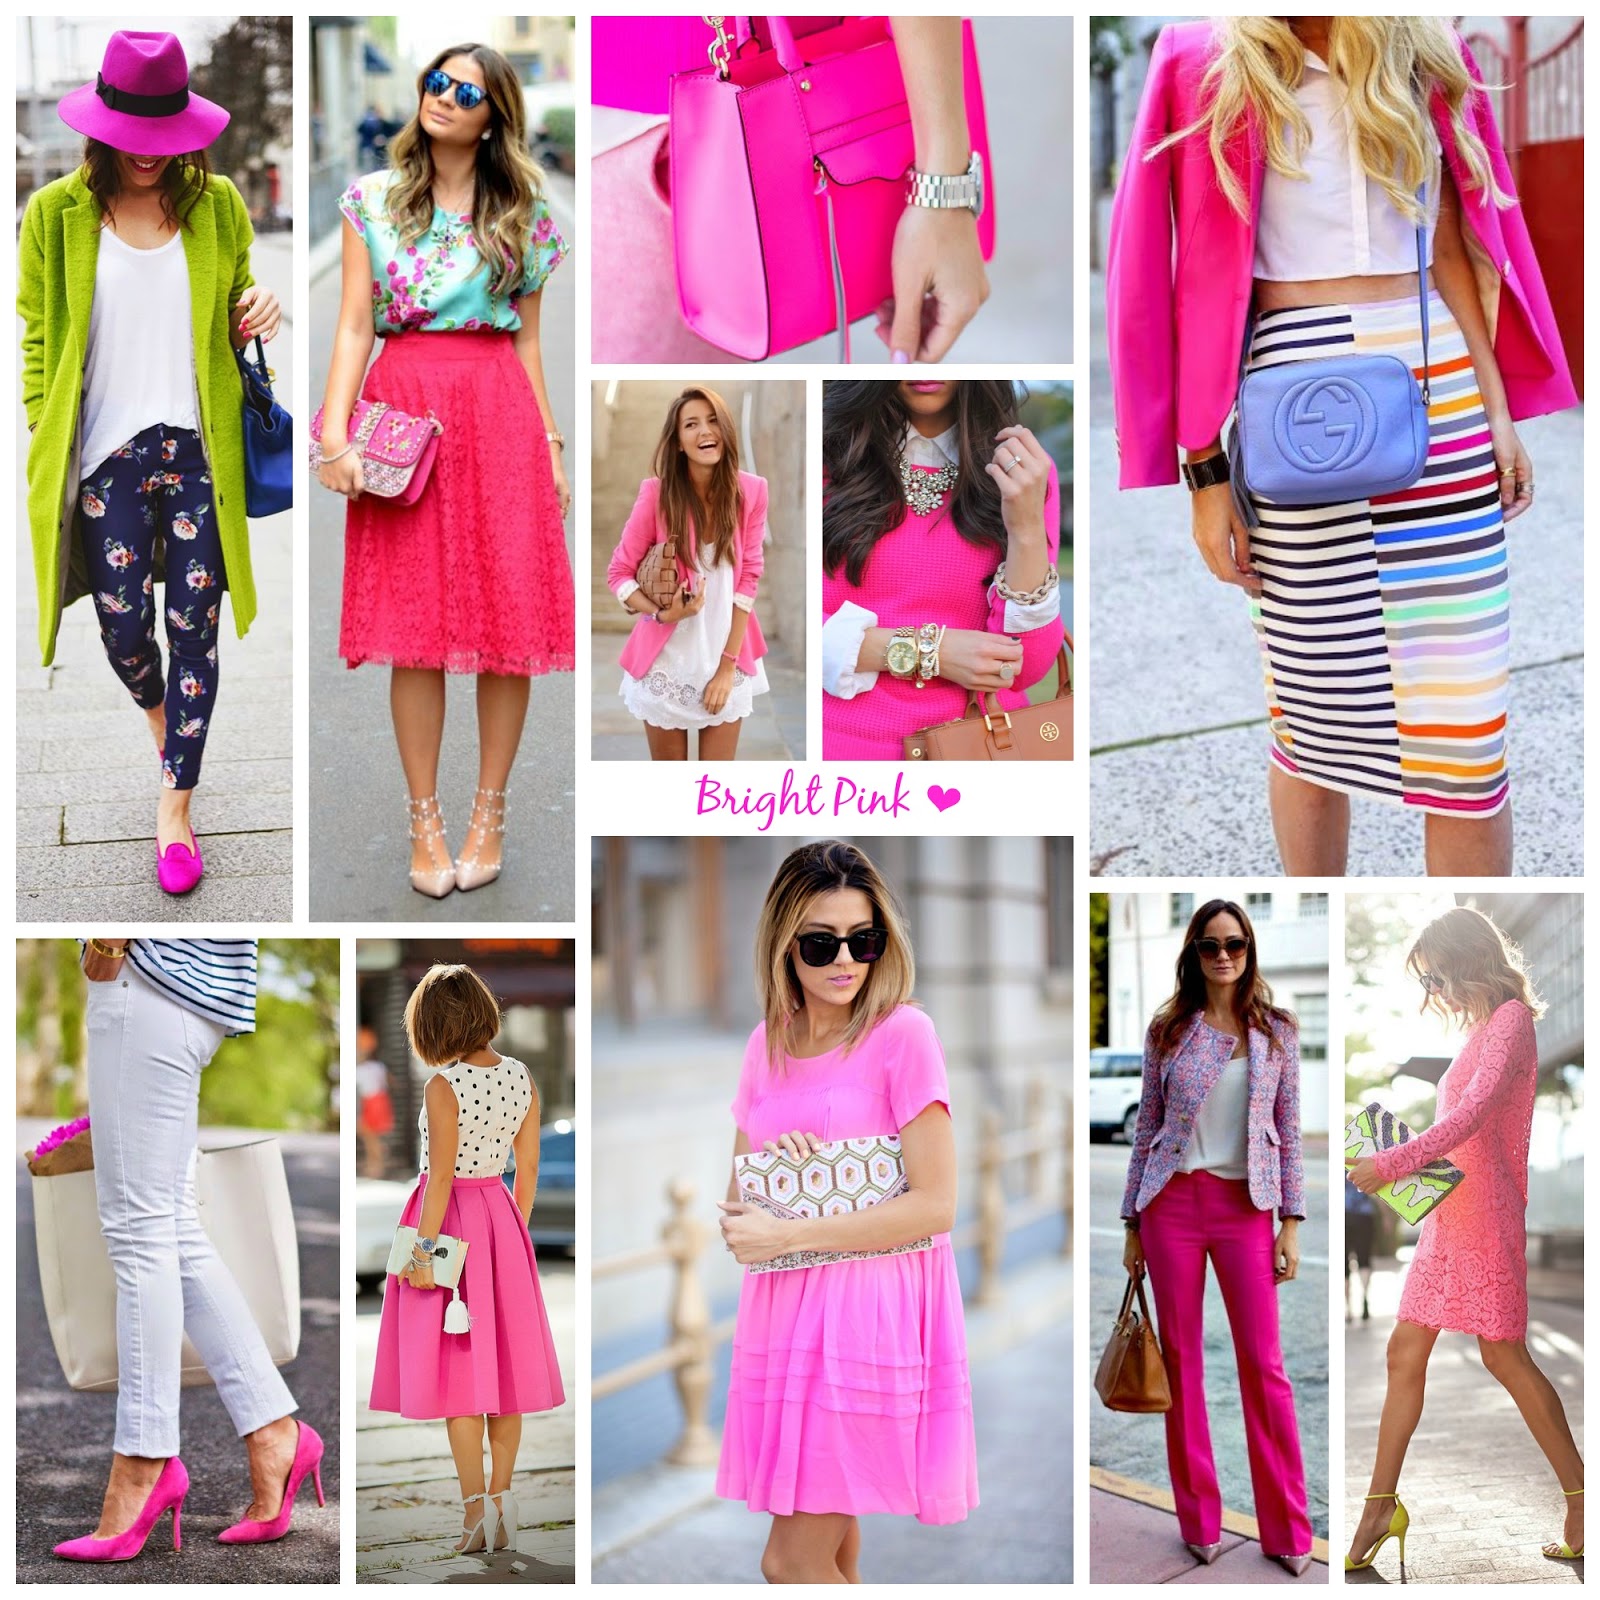 The Glitter Fashionista: How to Wear: Bright Pink